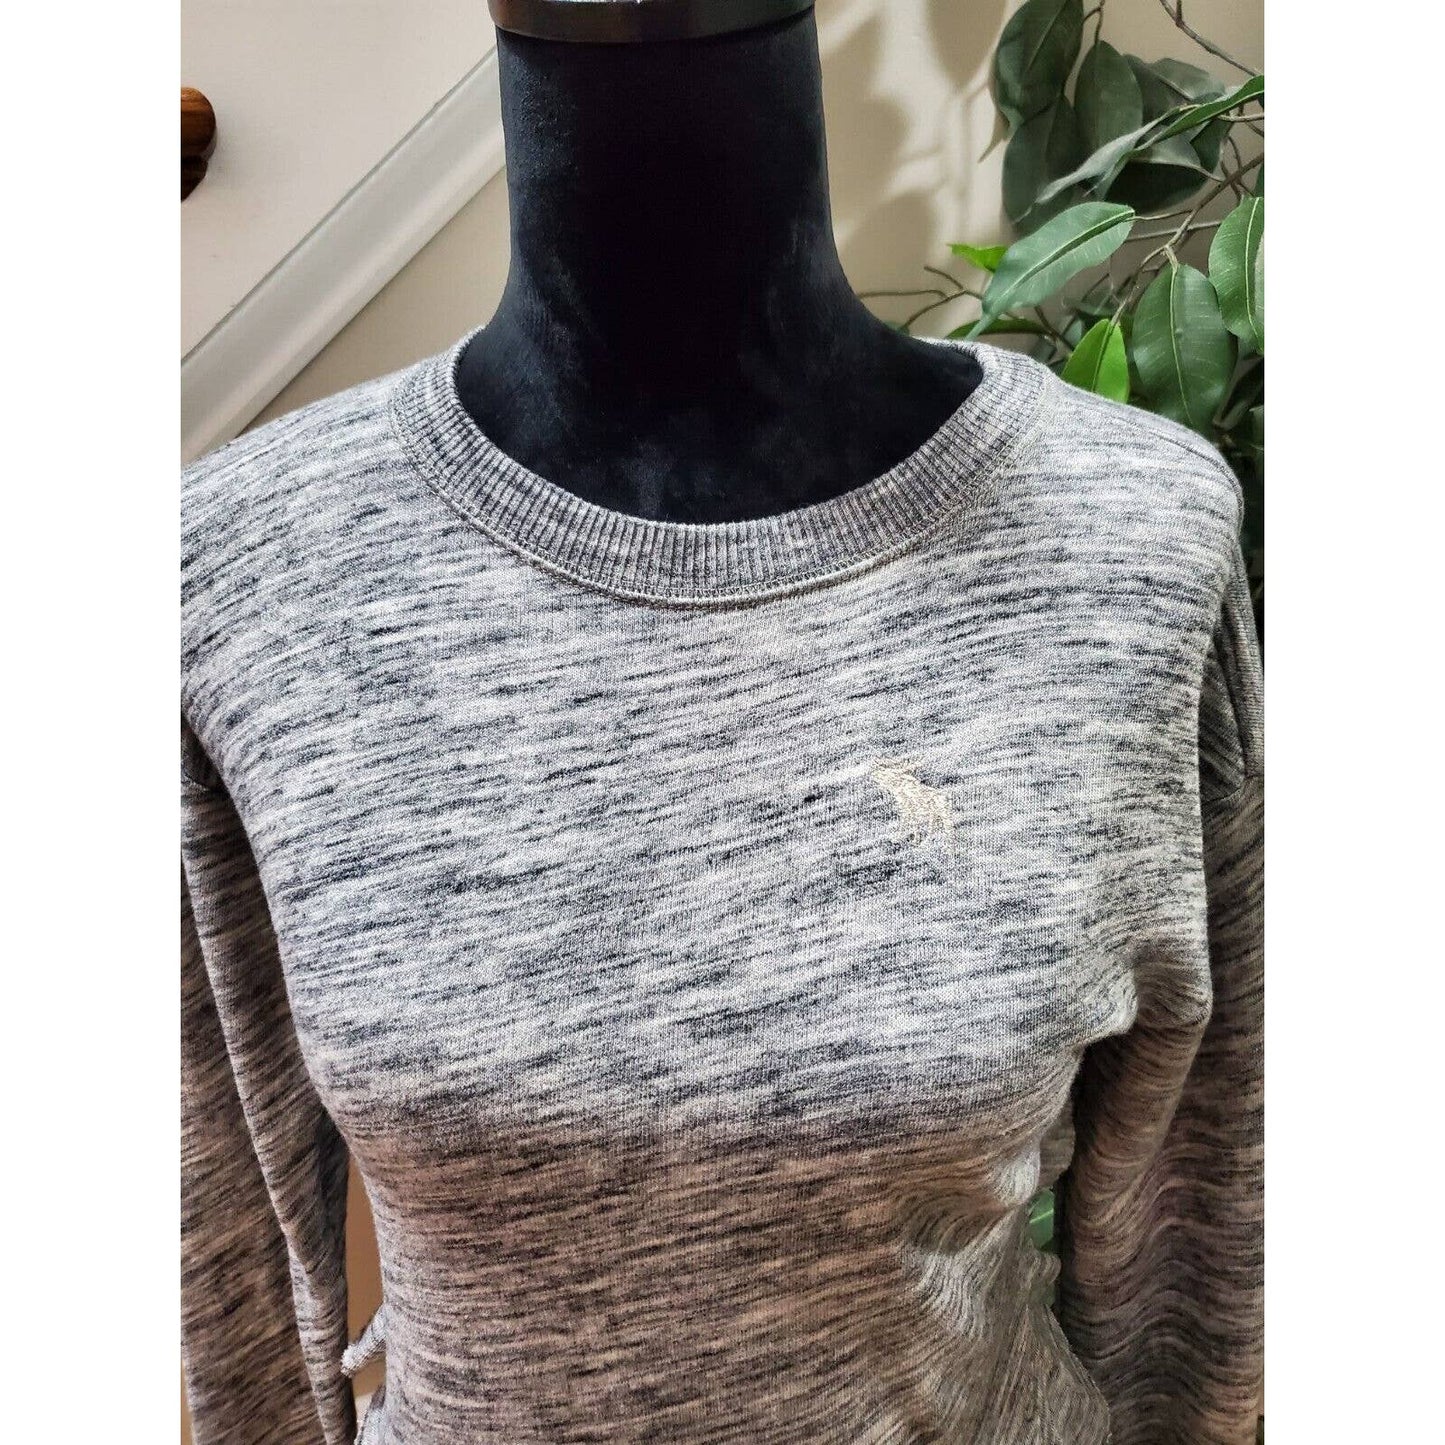 Abercrombie Women's Gray Cotton Round Neck Long Sleeve Pullover Knit Sweater S